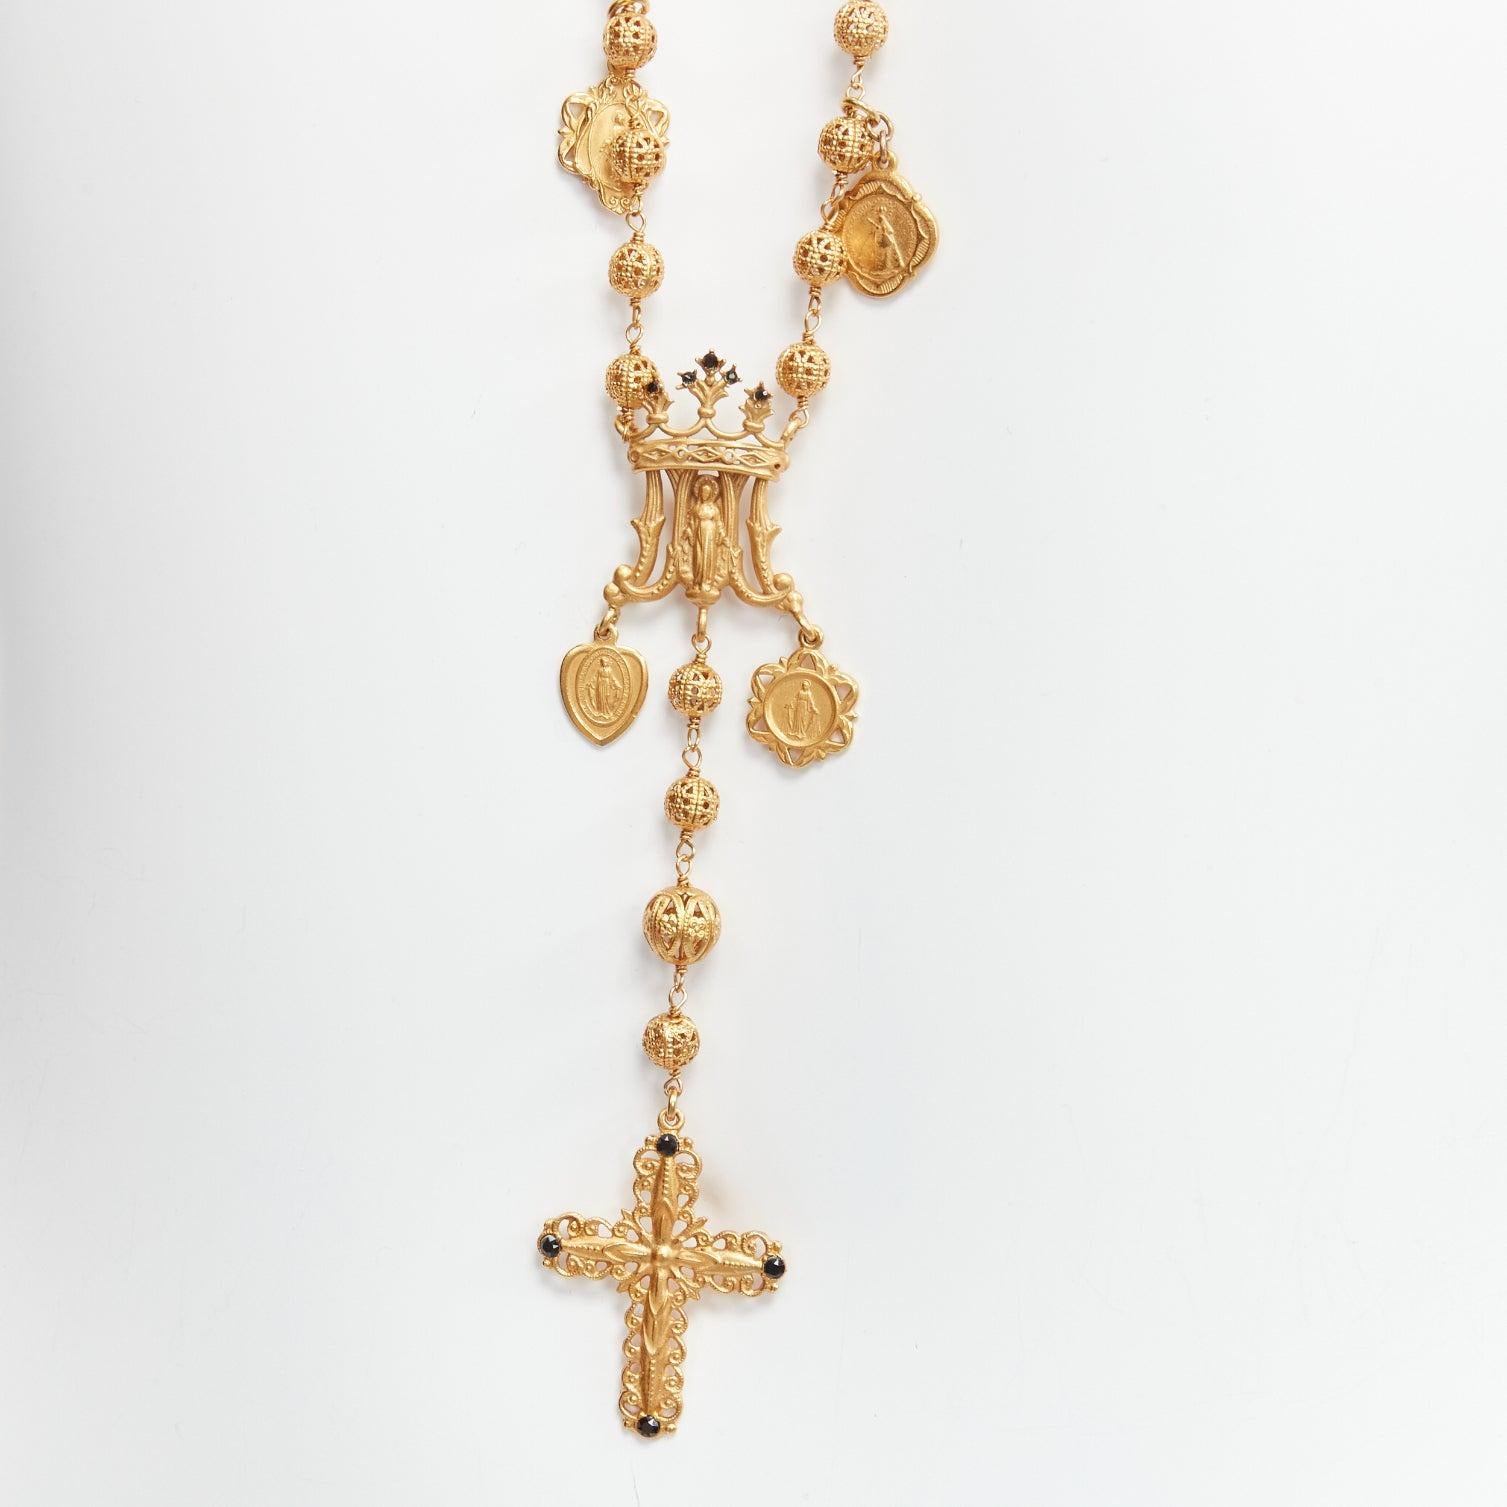 DOLCE GABBANA gold tone Jesus cross Saints coin charm long rosary necklace For Sale 2